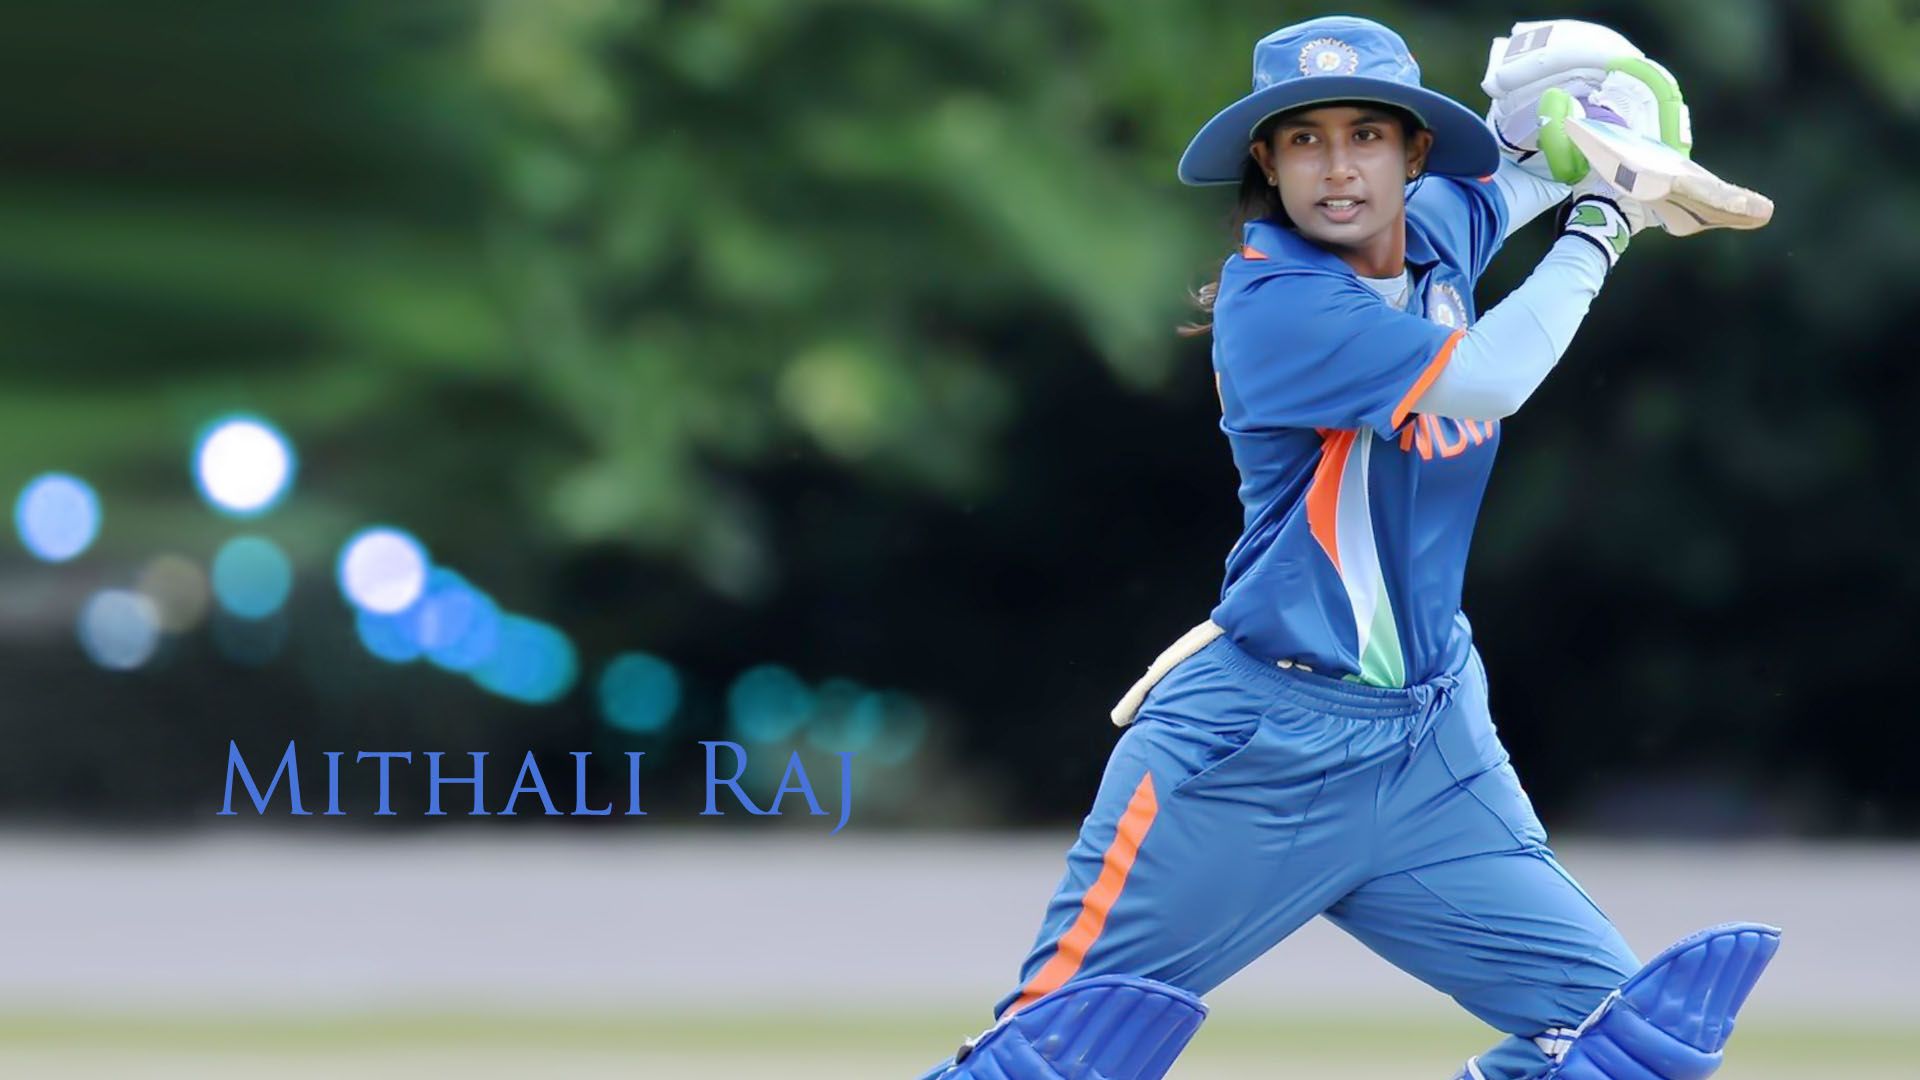 Mithali Raj Wallpapers To Download For Free - Indian Female Cricket , HD Wallpaper & Backgrounds